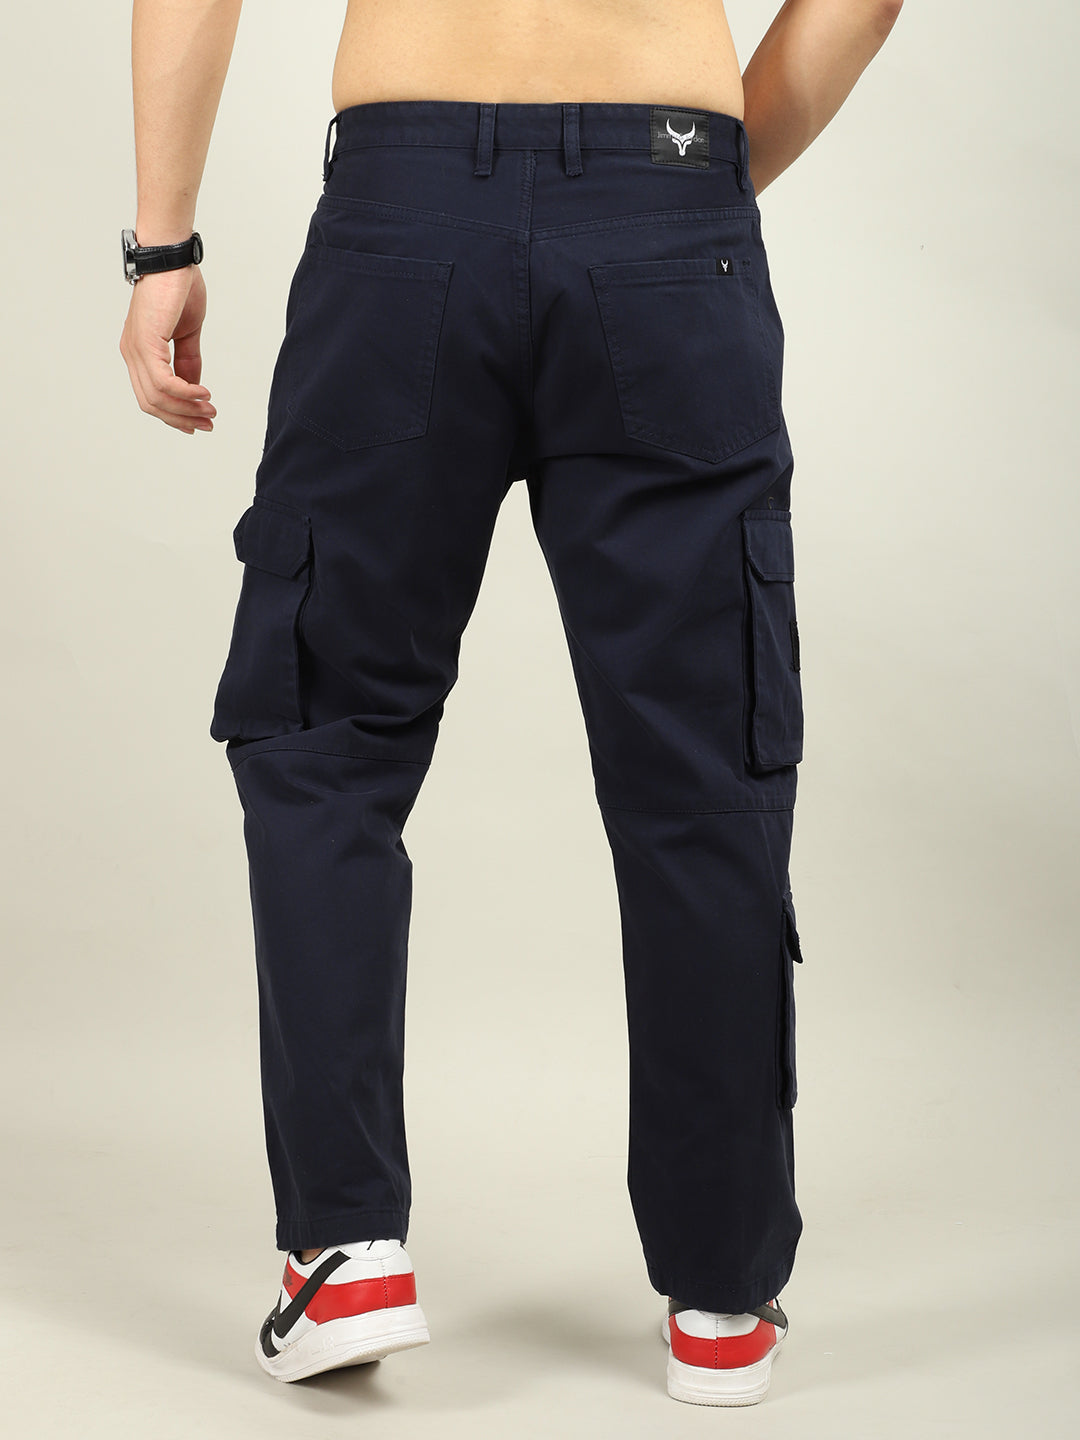 Fire Navy Baggy Fit 8 Pocket Cargo